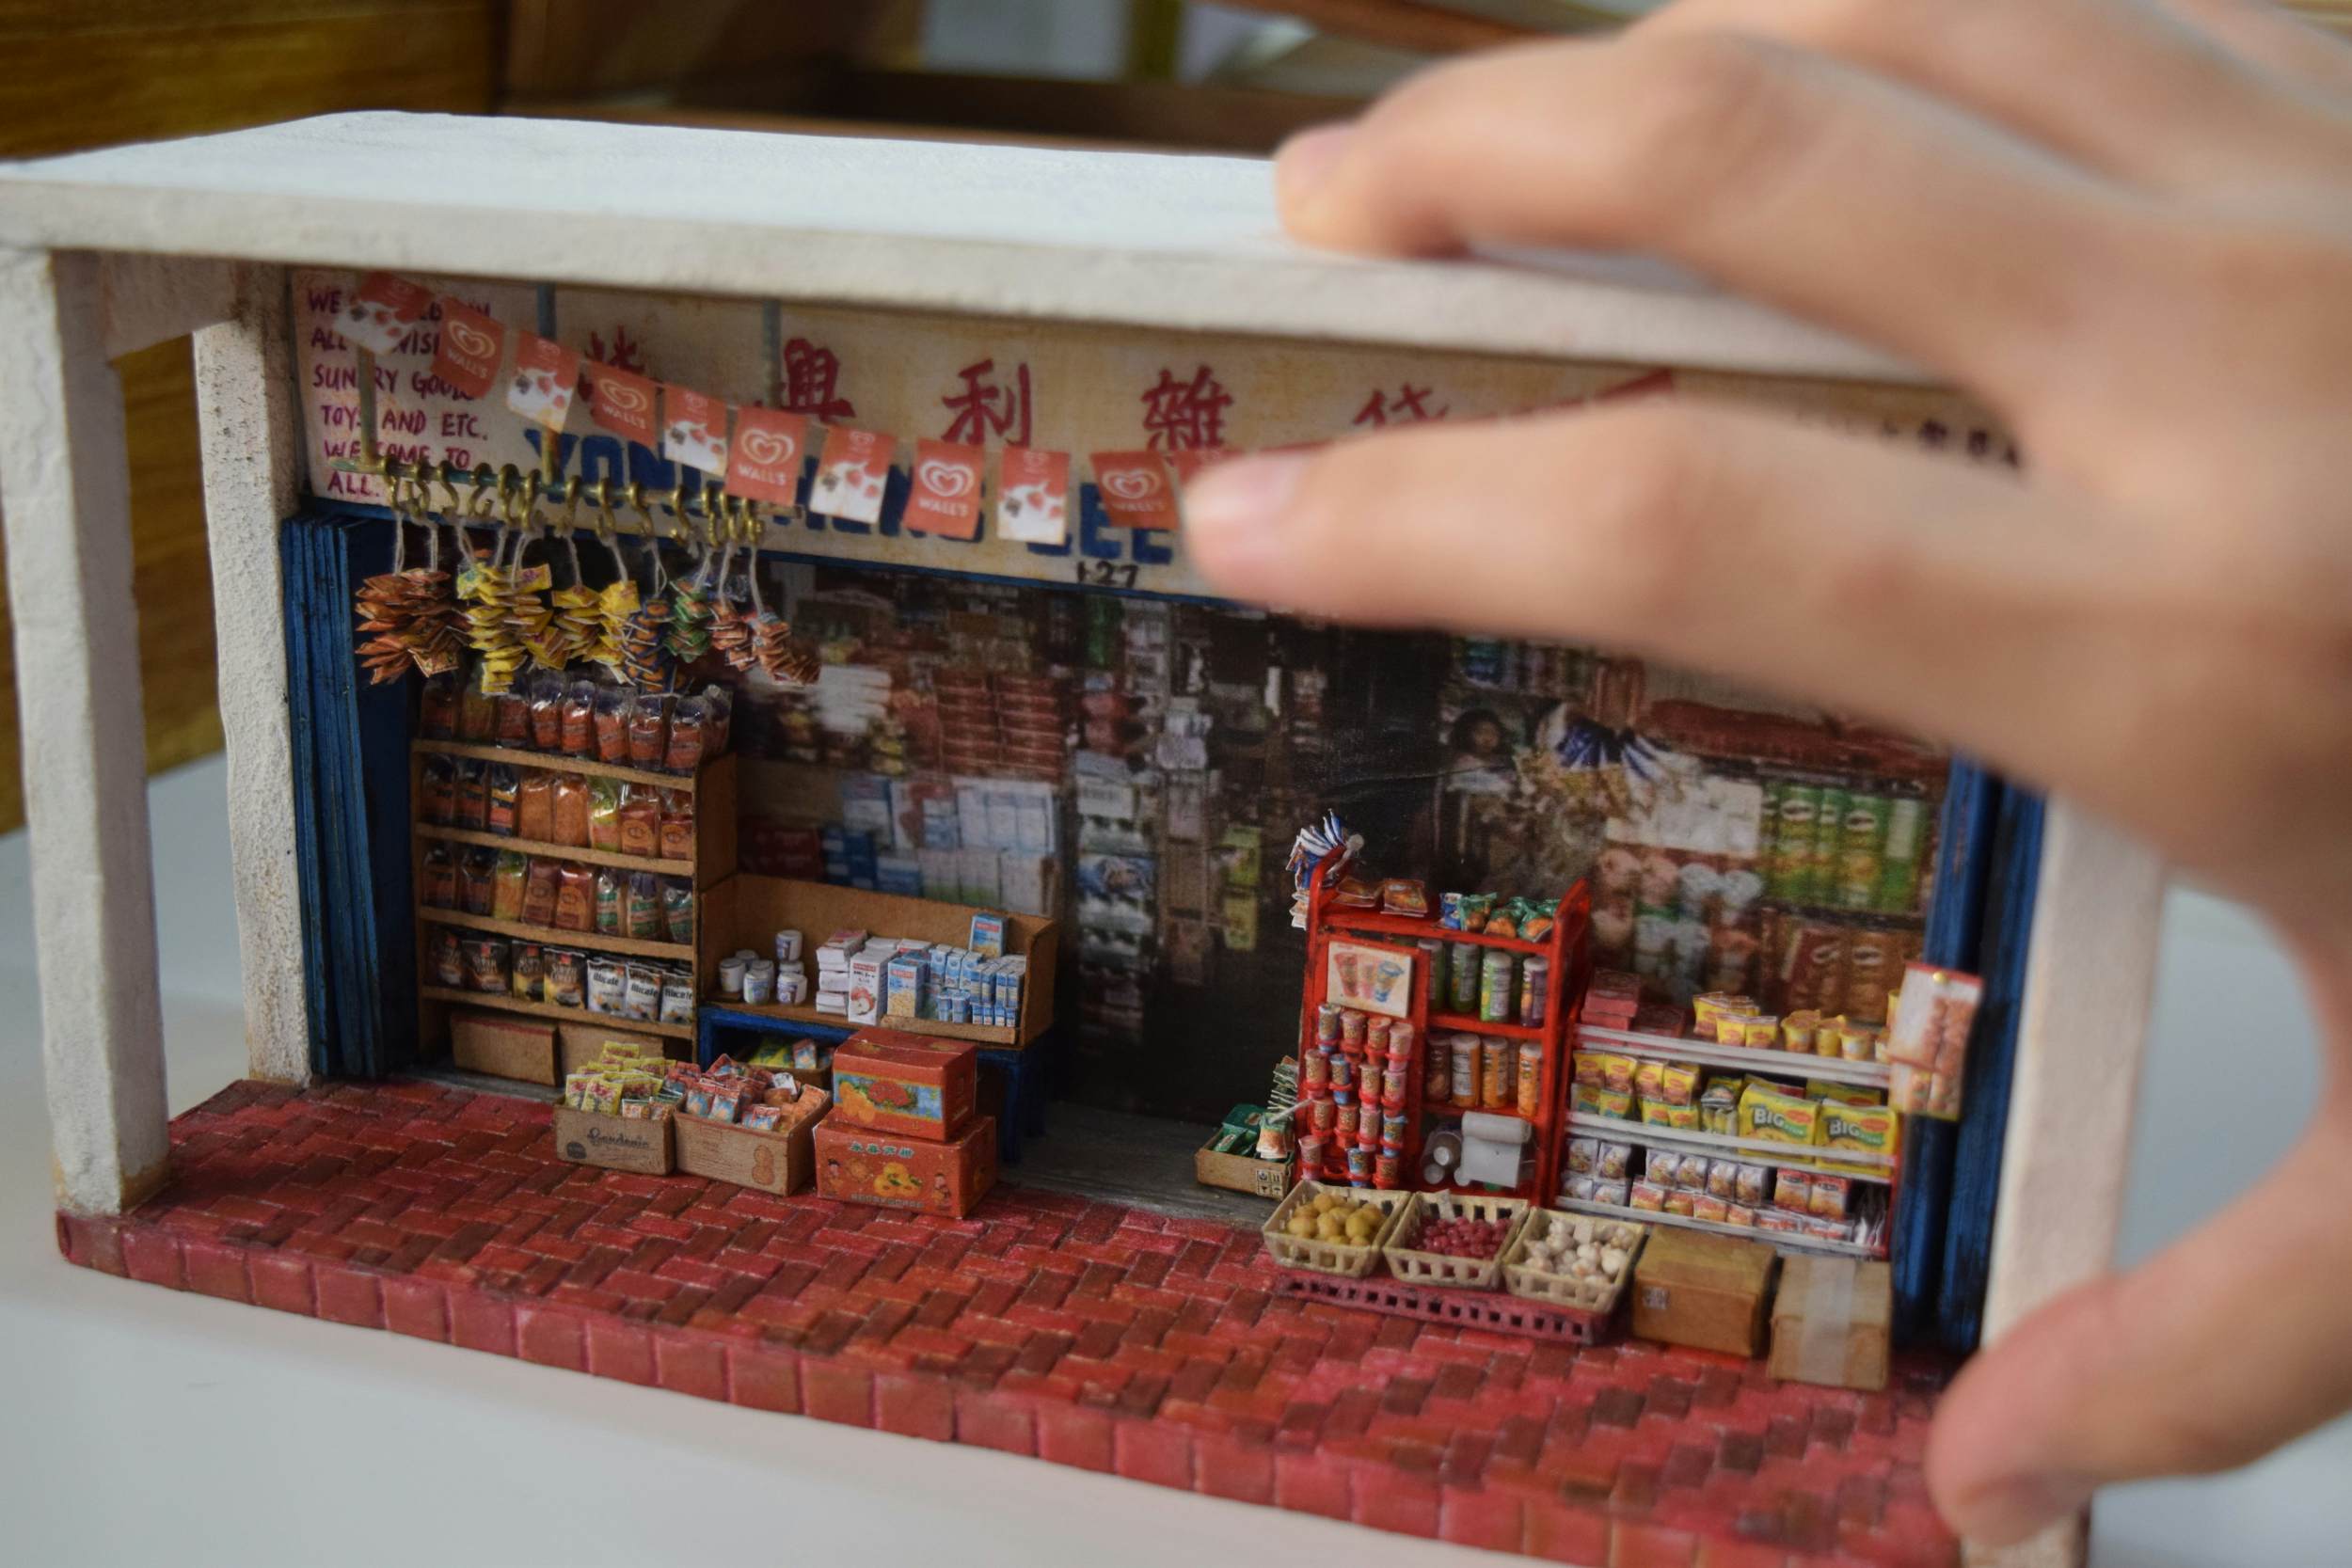 Discover Malaysian culture through this incredible miniature art